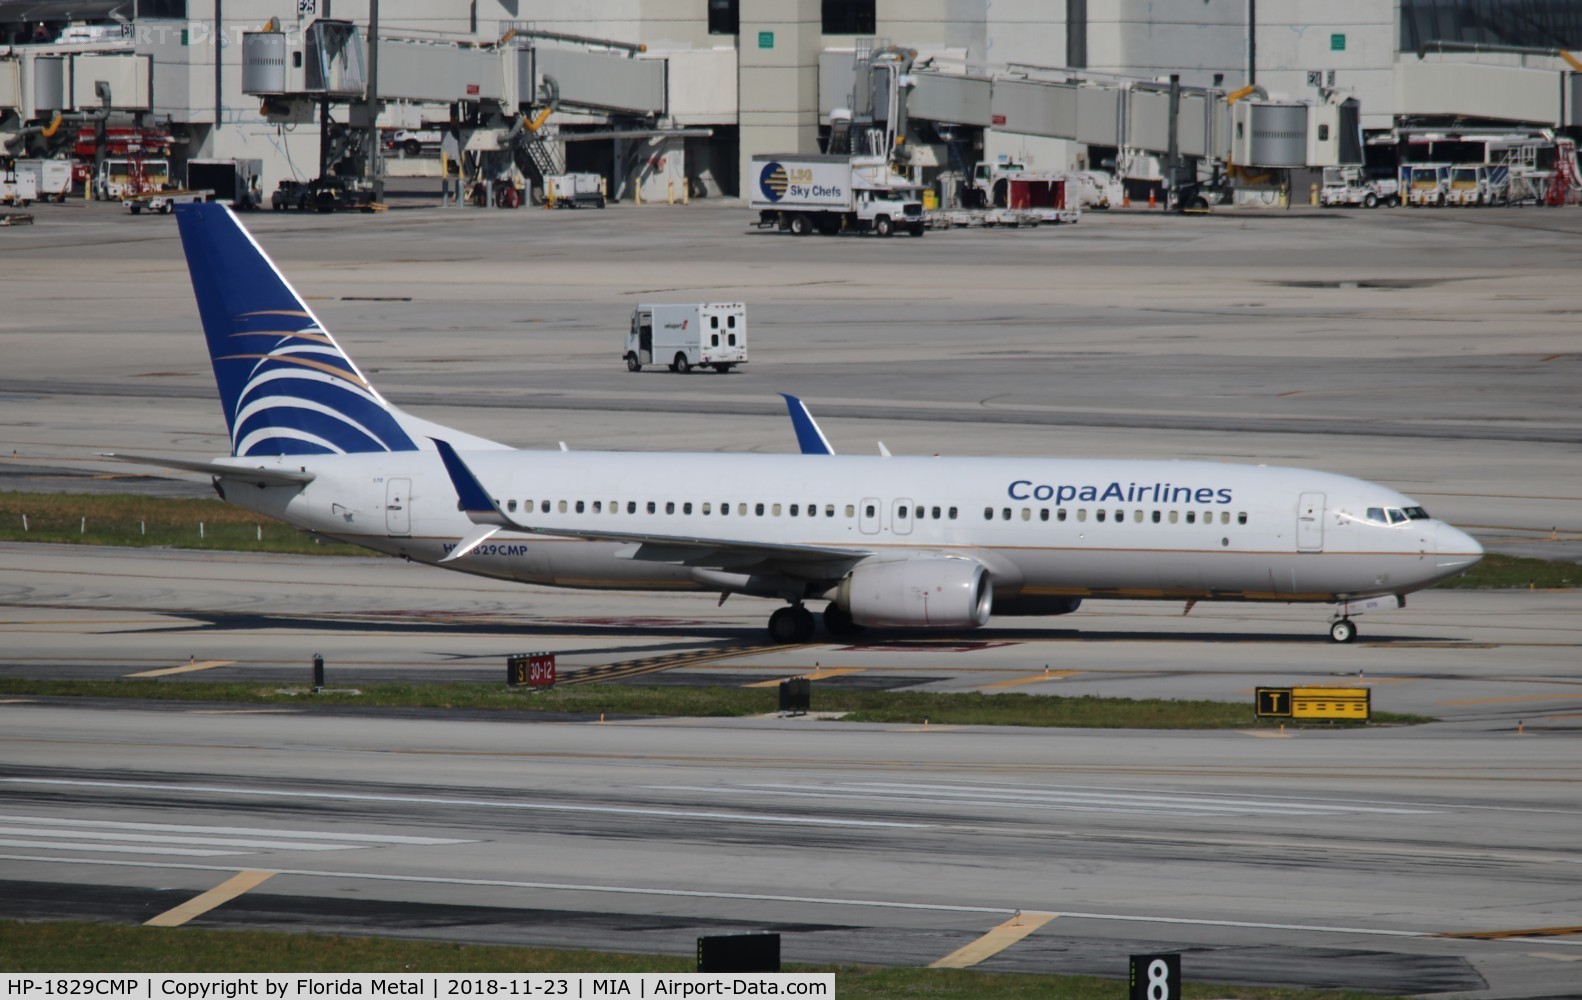 HP-1829CMP, 2013 Boeing 737-8V3 C/N 38882, COPA now without the soccer colors